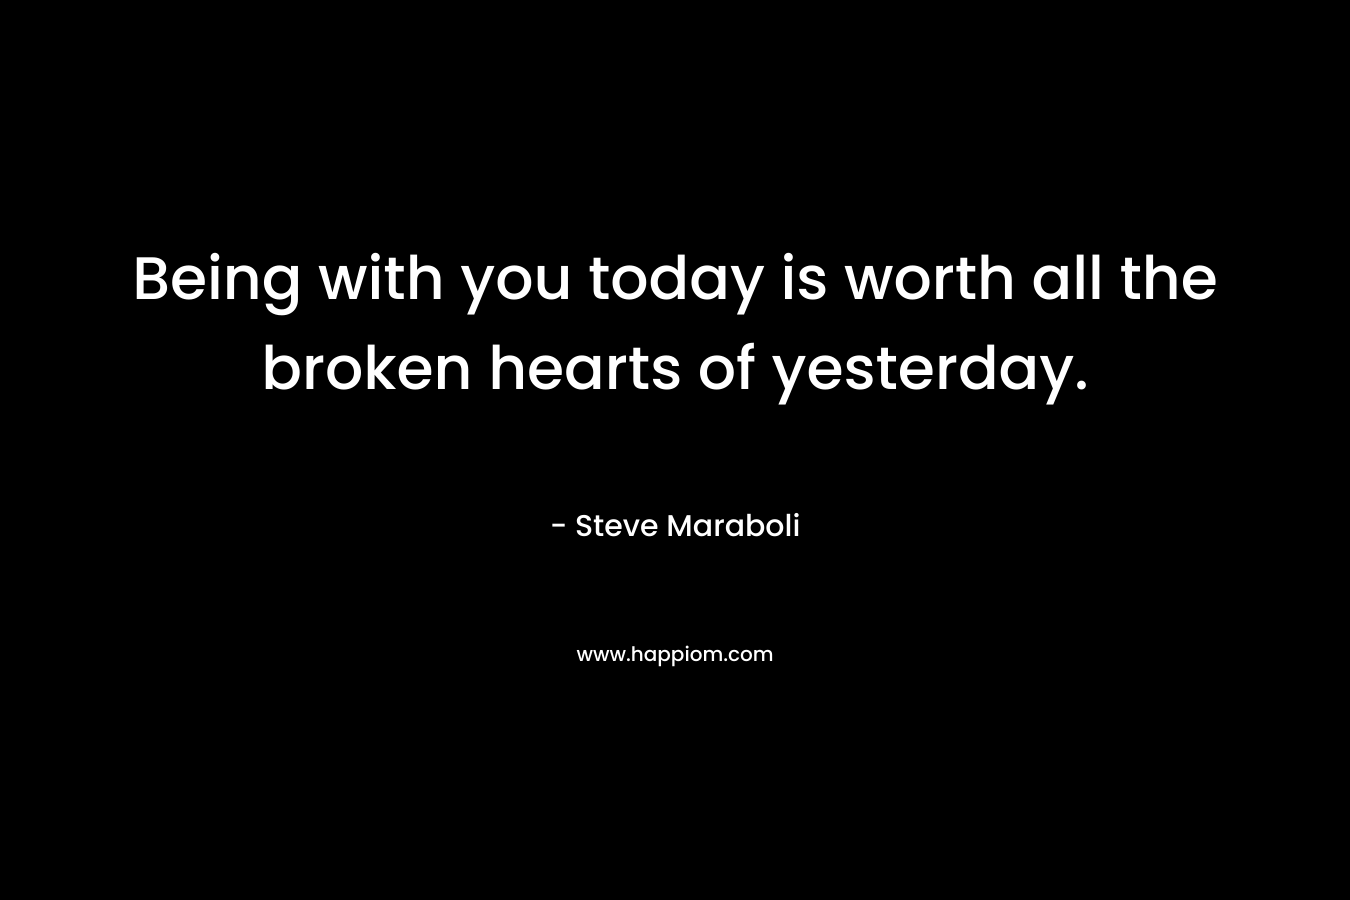 Being with you today is worth all the broken hearts of yesterday.